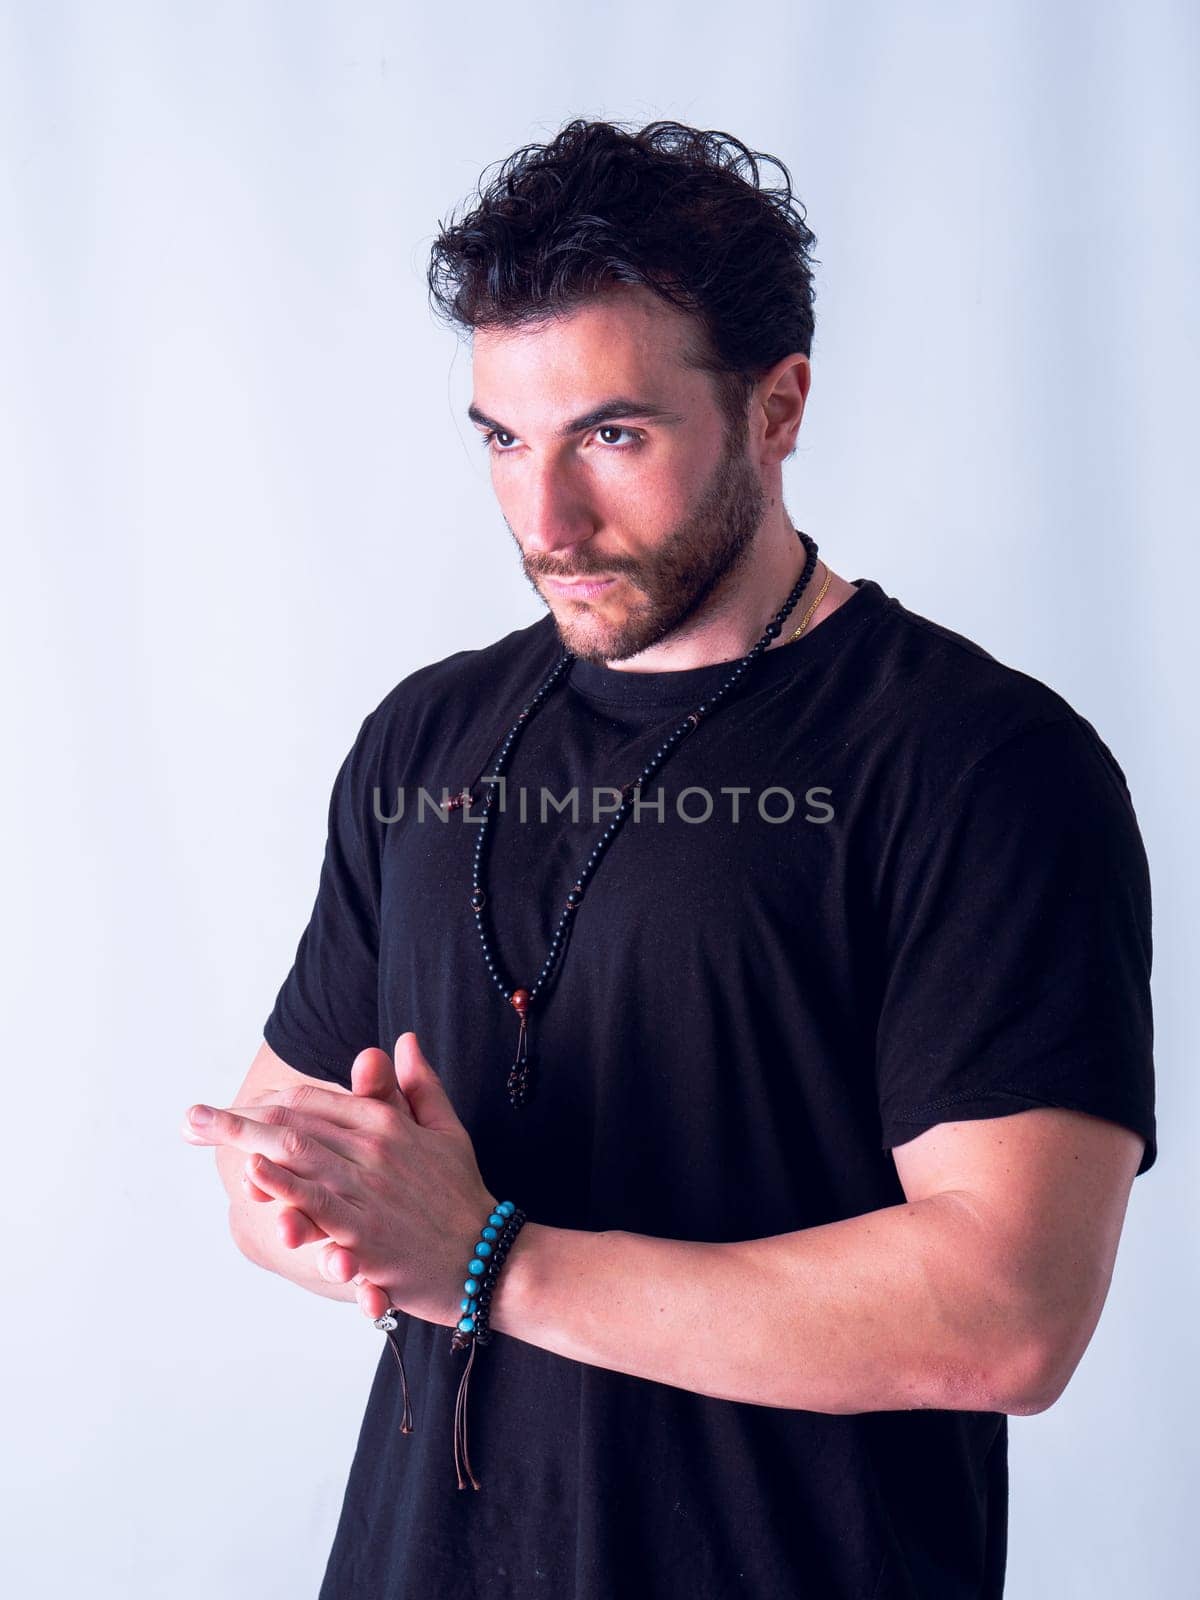 A man in a black shirt is posing for a picture, with hands joined together, on white background